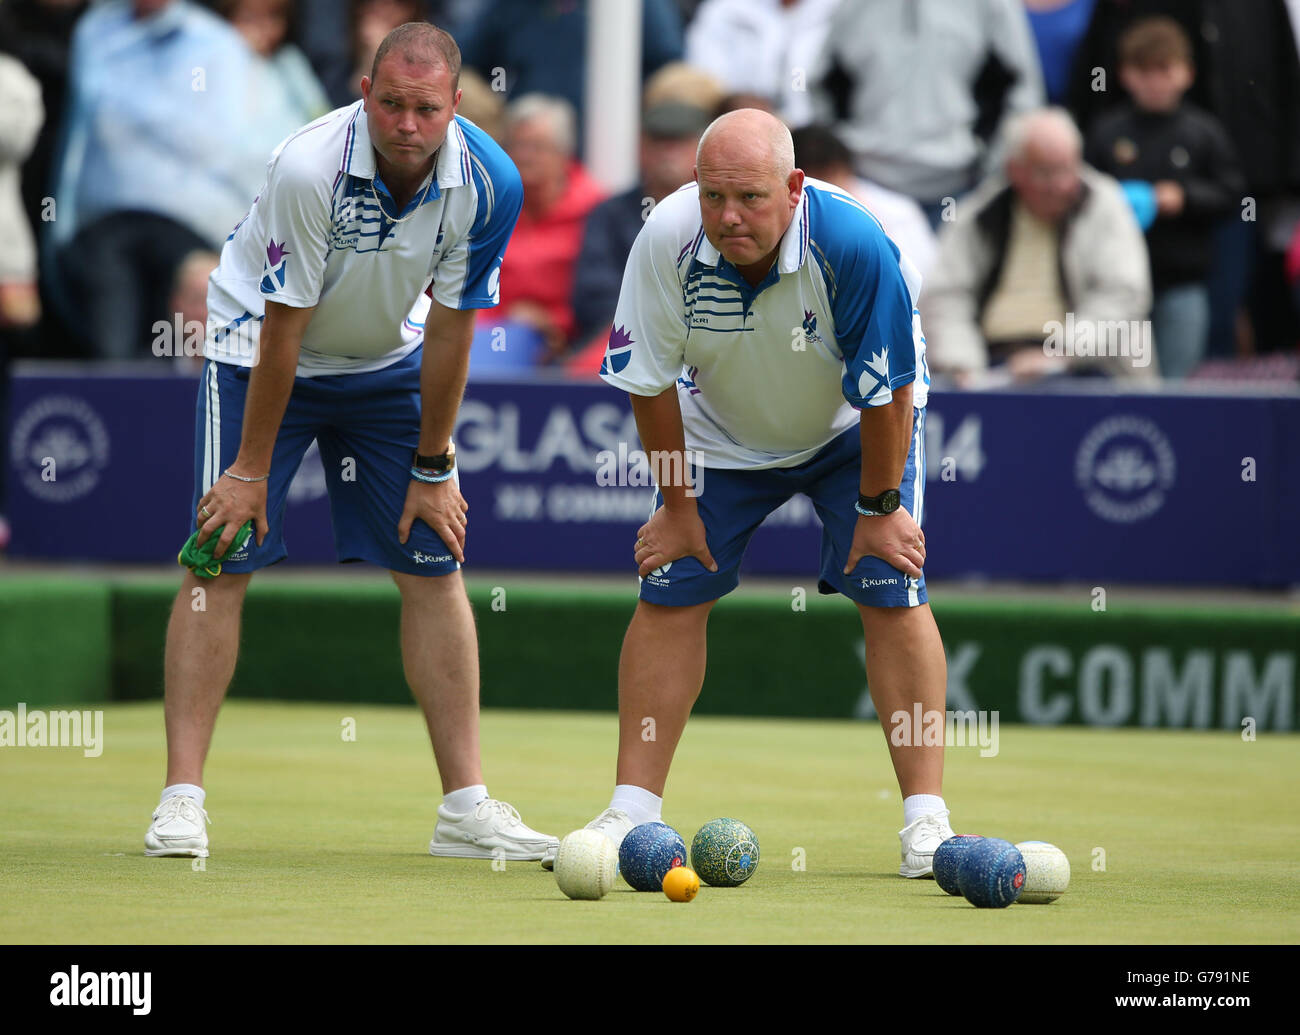 Scotland's Paul Foste (left) and Alex Marshall view the head in their Semi-final Men's Fours match against Australia at Kelvingrove Lawn Bowls Centre, during the 2014 Commonwealth Games in Glasgow. Stock Photo